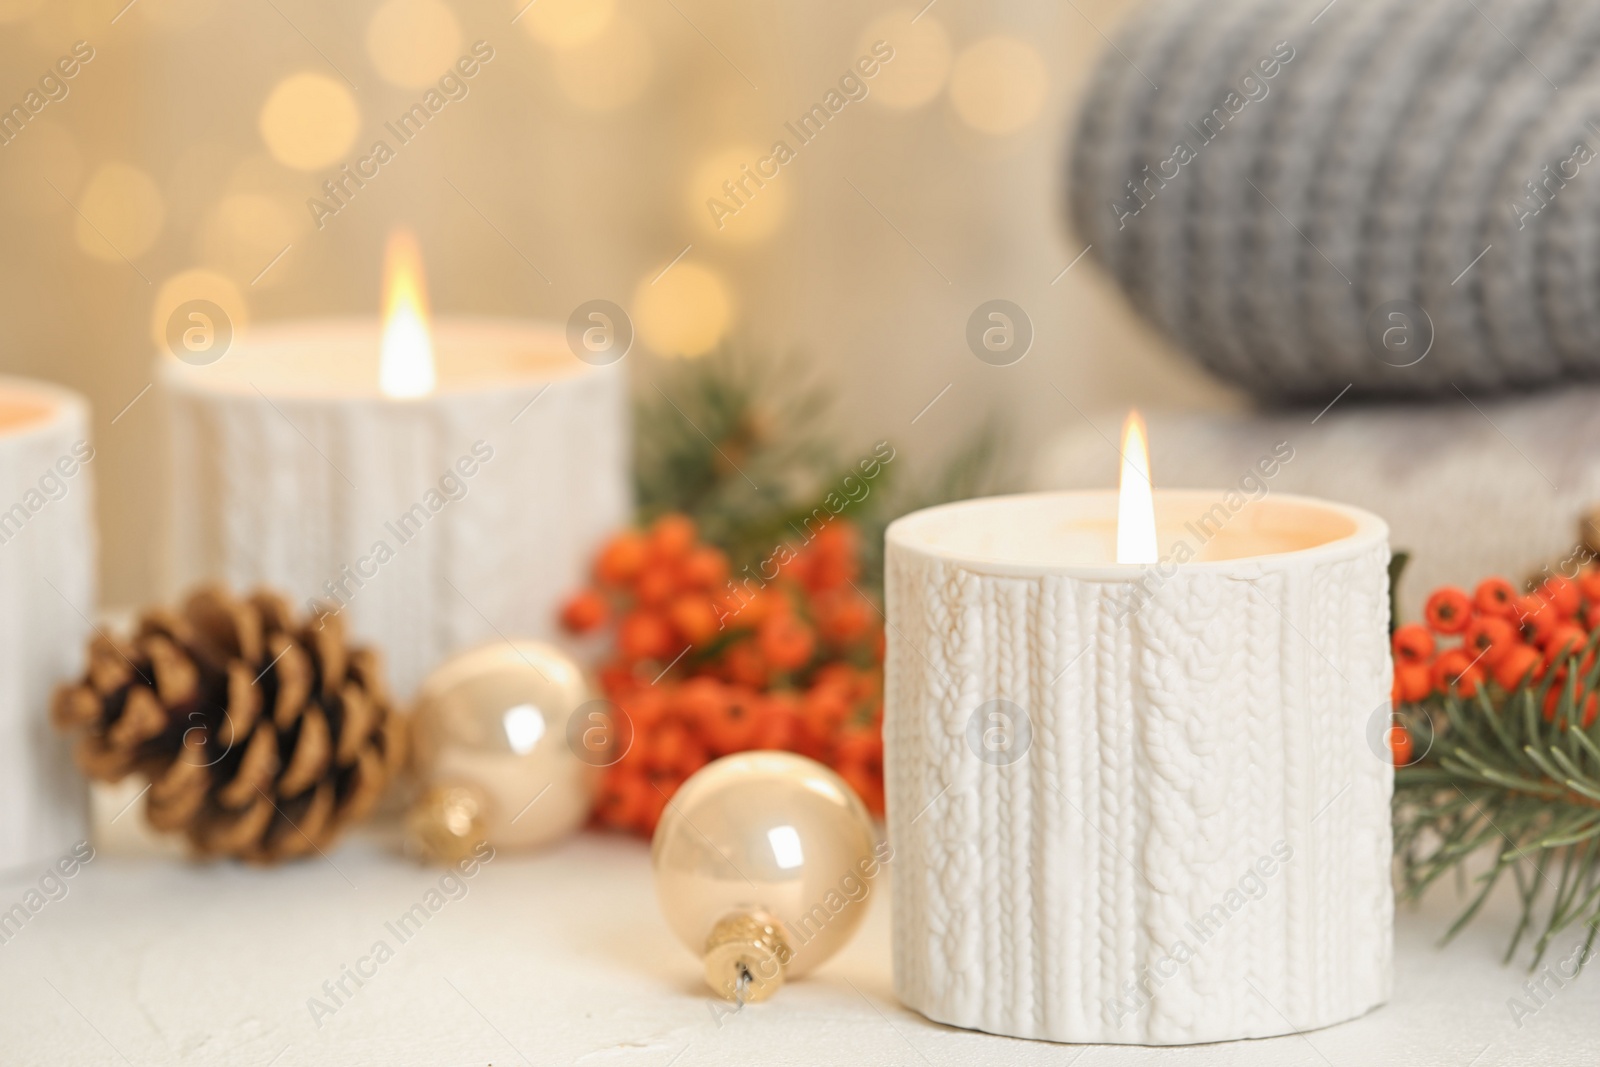 Photo of Holders with burning candles and decoration on white table against blurred Christmas lights